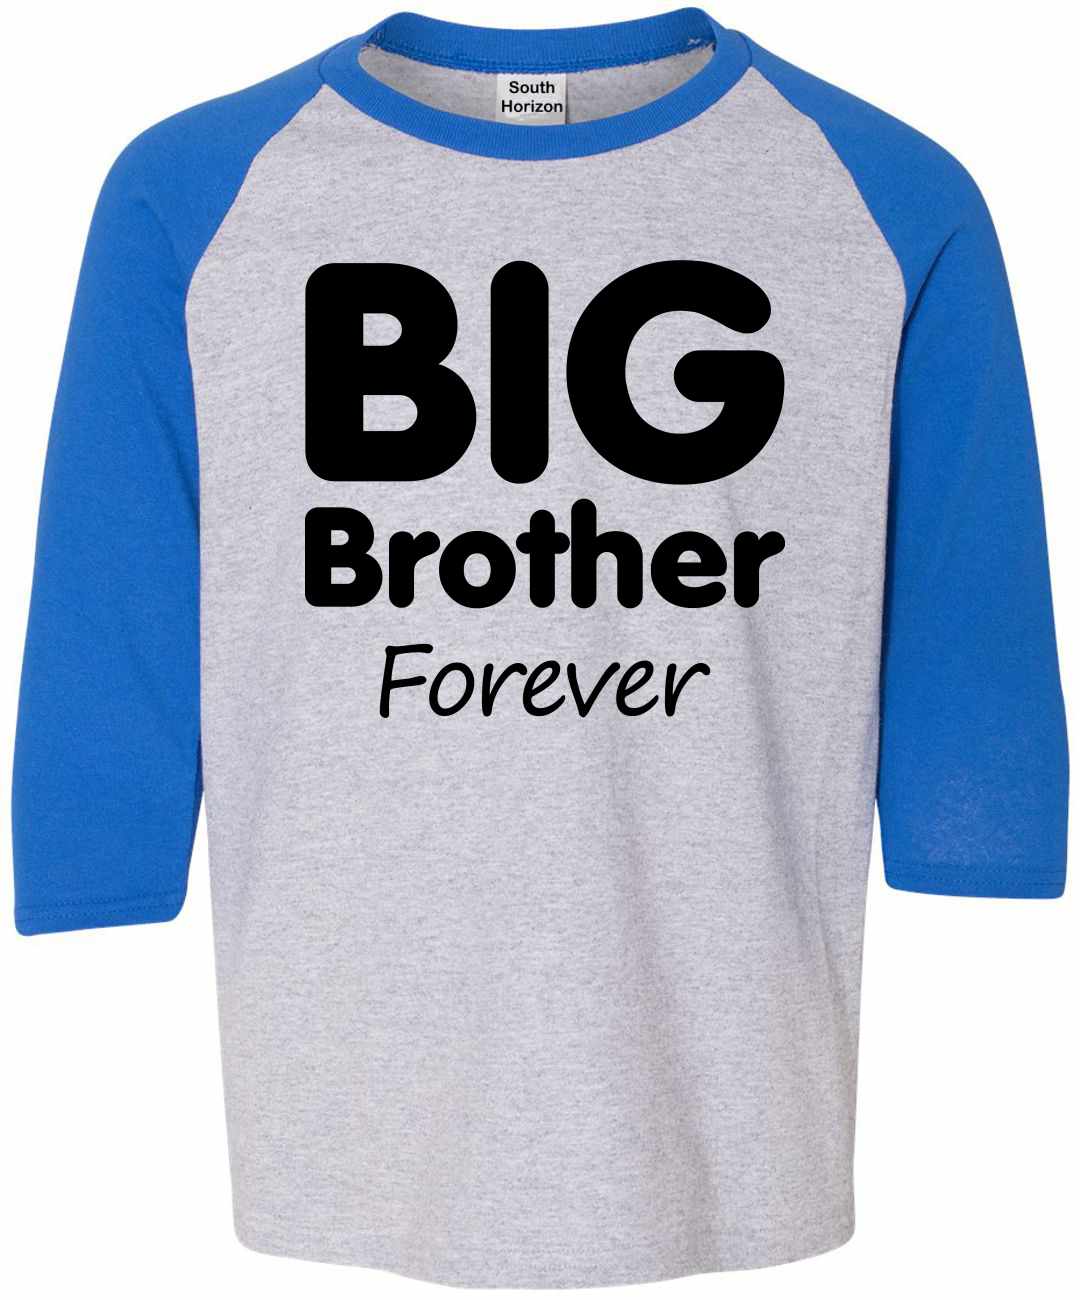 Big Brother Forever on Youth Baseball Shirt (#952-212)